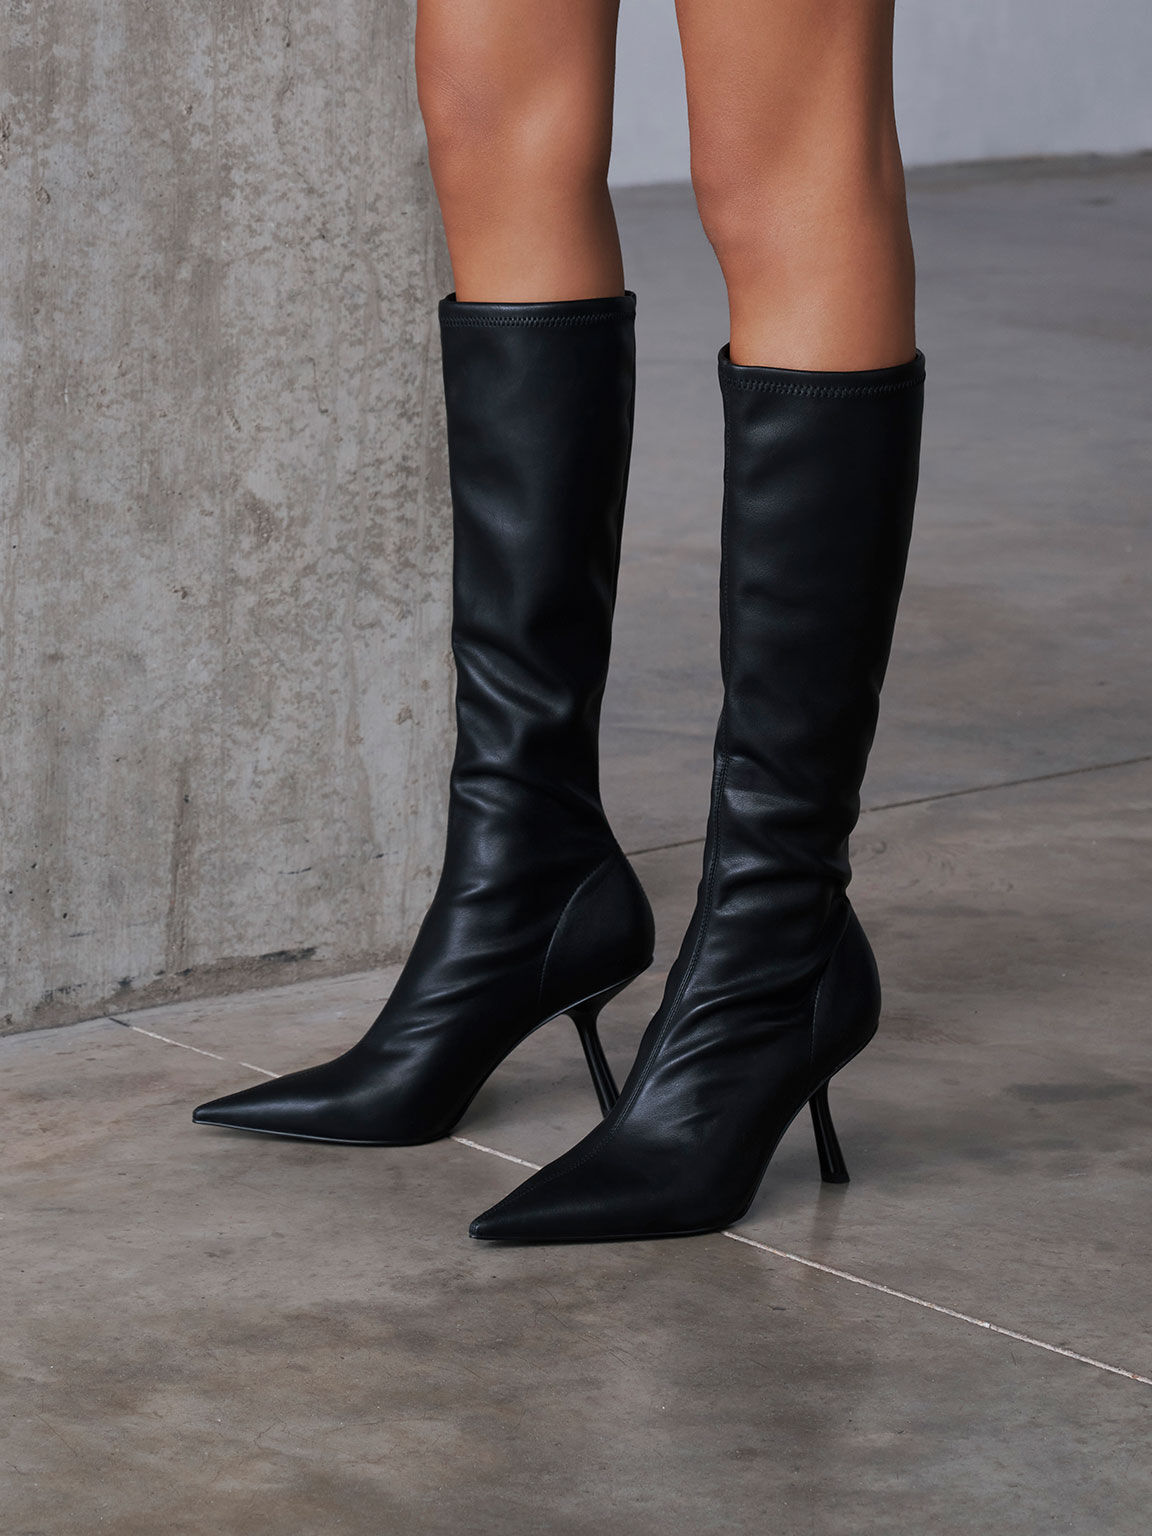 CYCAS KNEE BOOT 95 | Black Nappa Leather Knee-High Boots | New Collection |  JIMMY CHOO